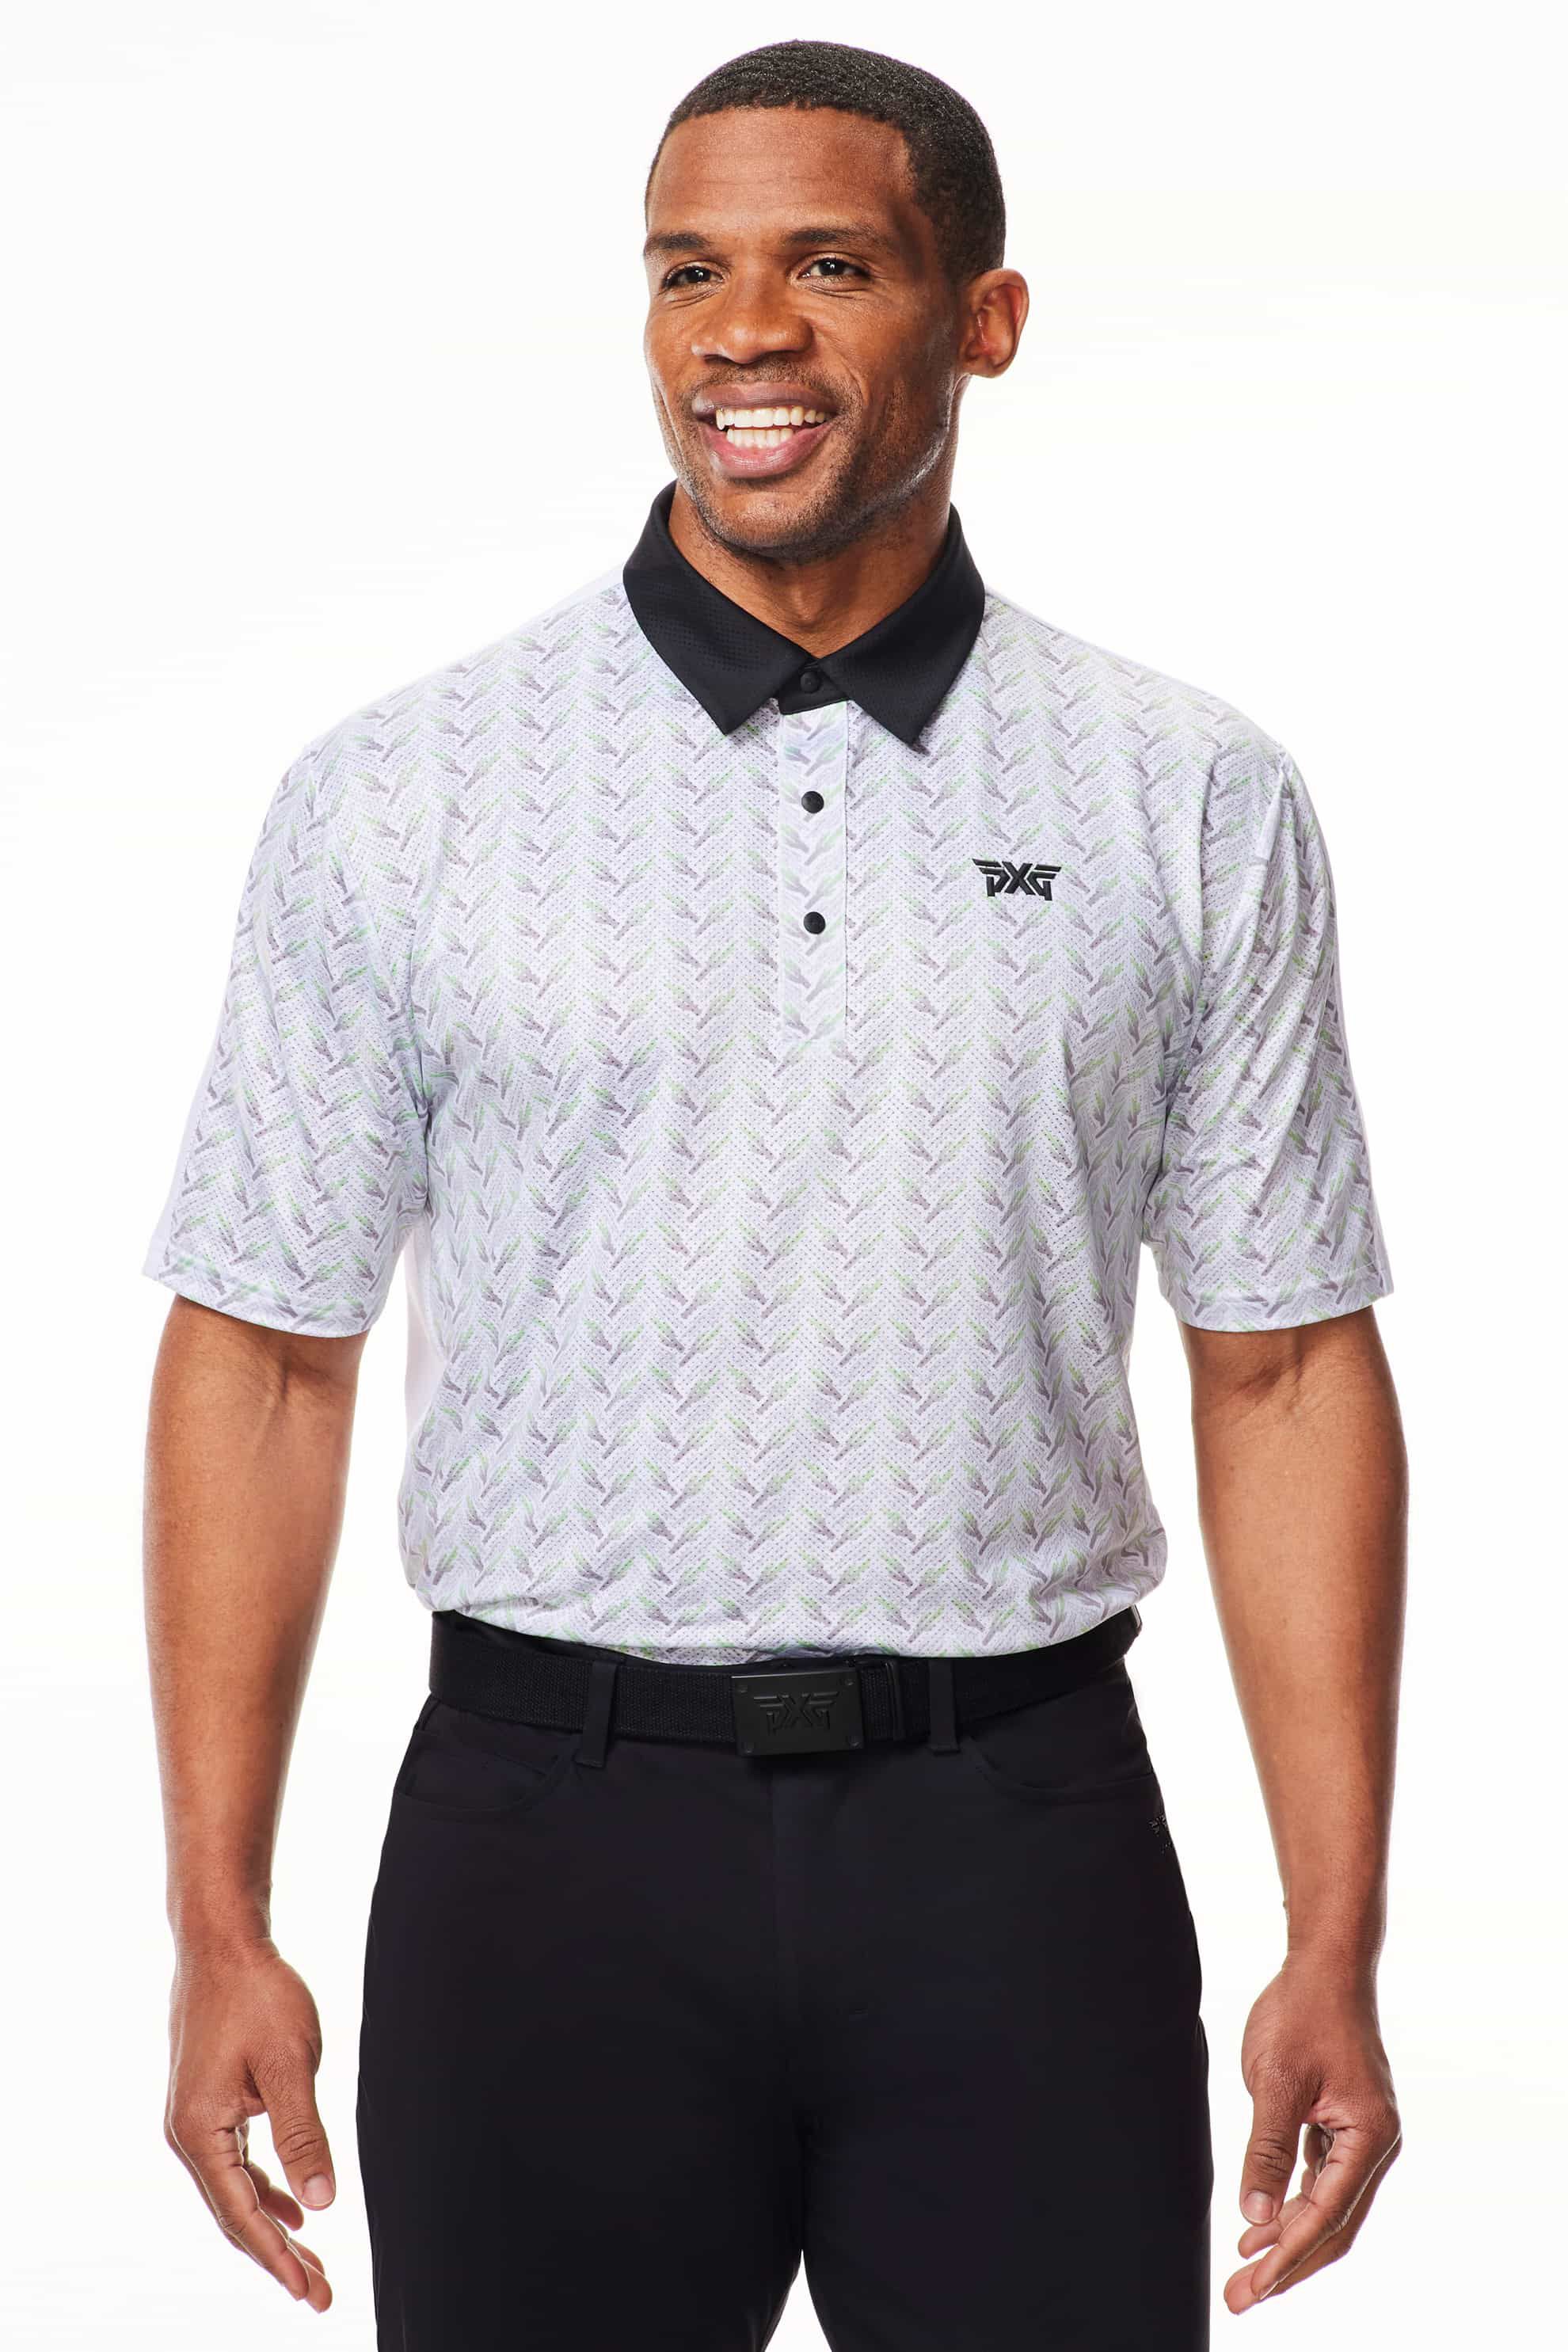 Shop Men's Golf Polos - Comfort and Athletic Fit | PXG